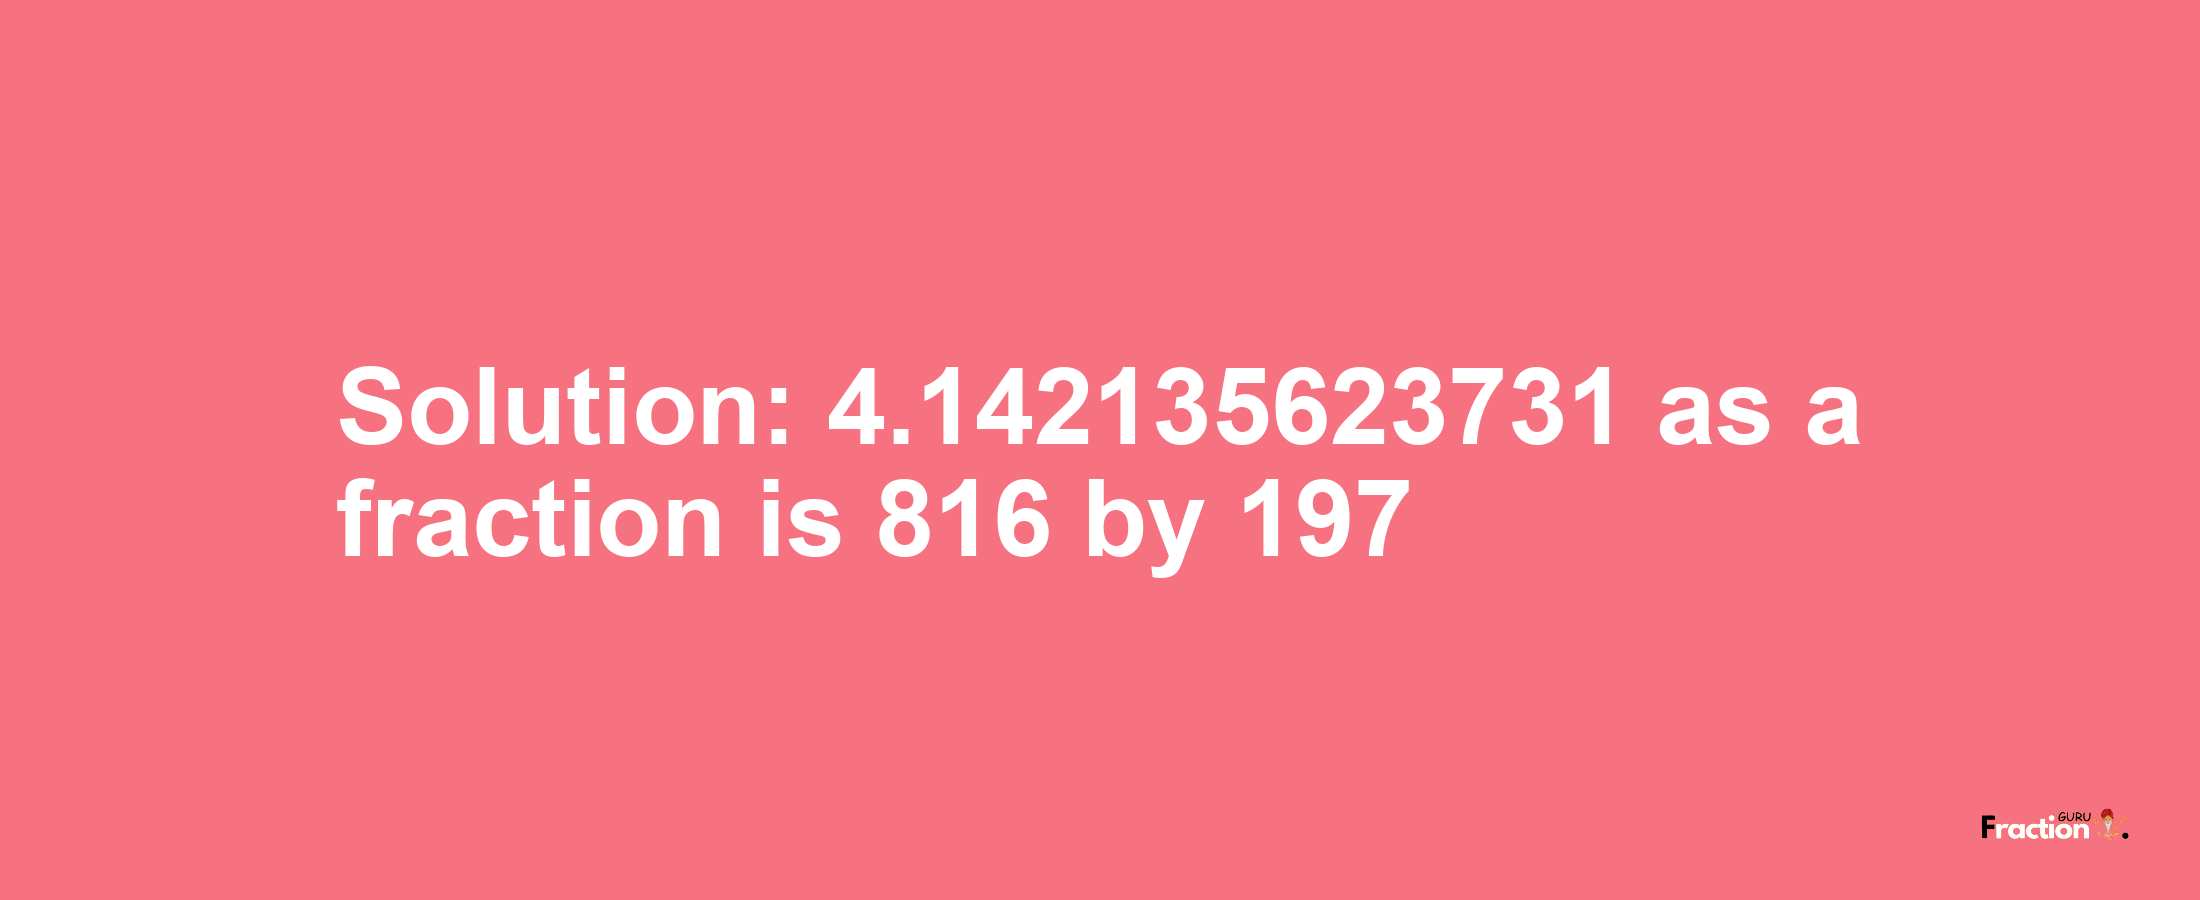 Solution:4.142135623731 as a fraction is 816/197